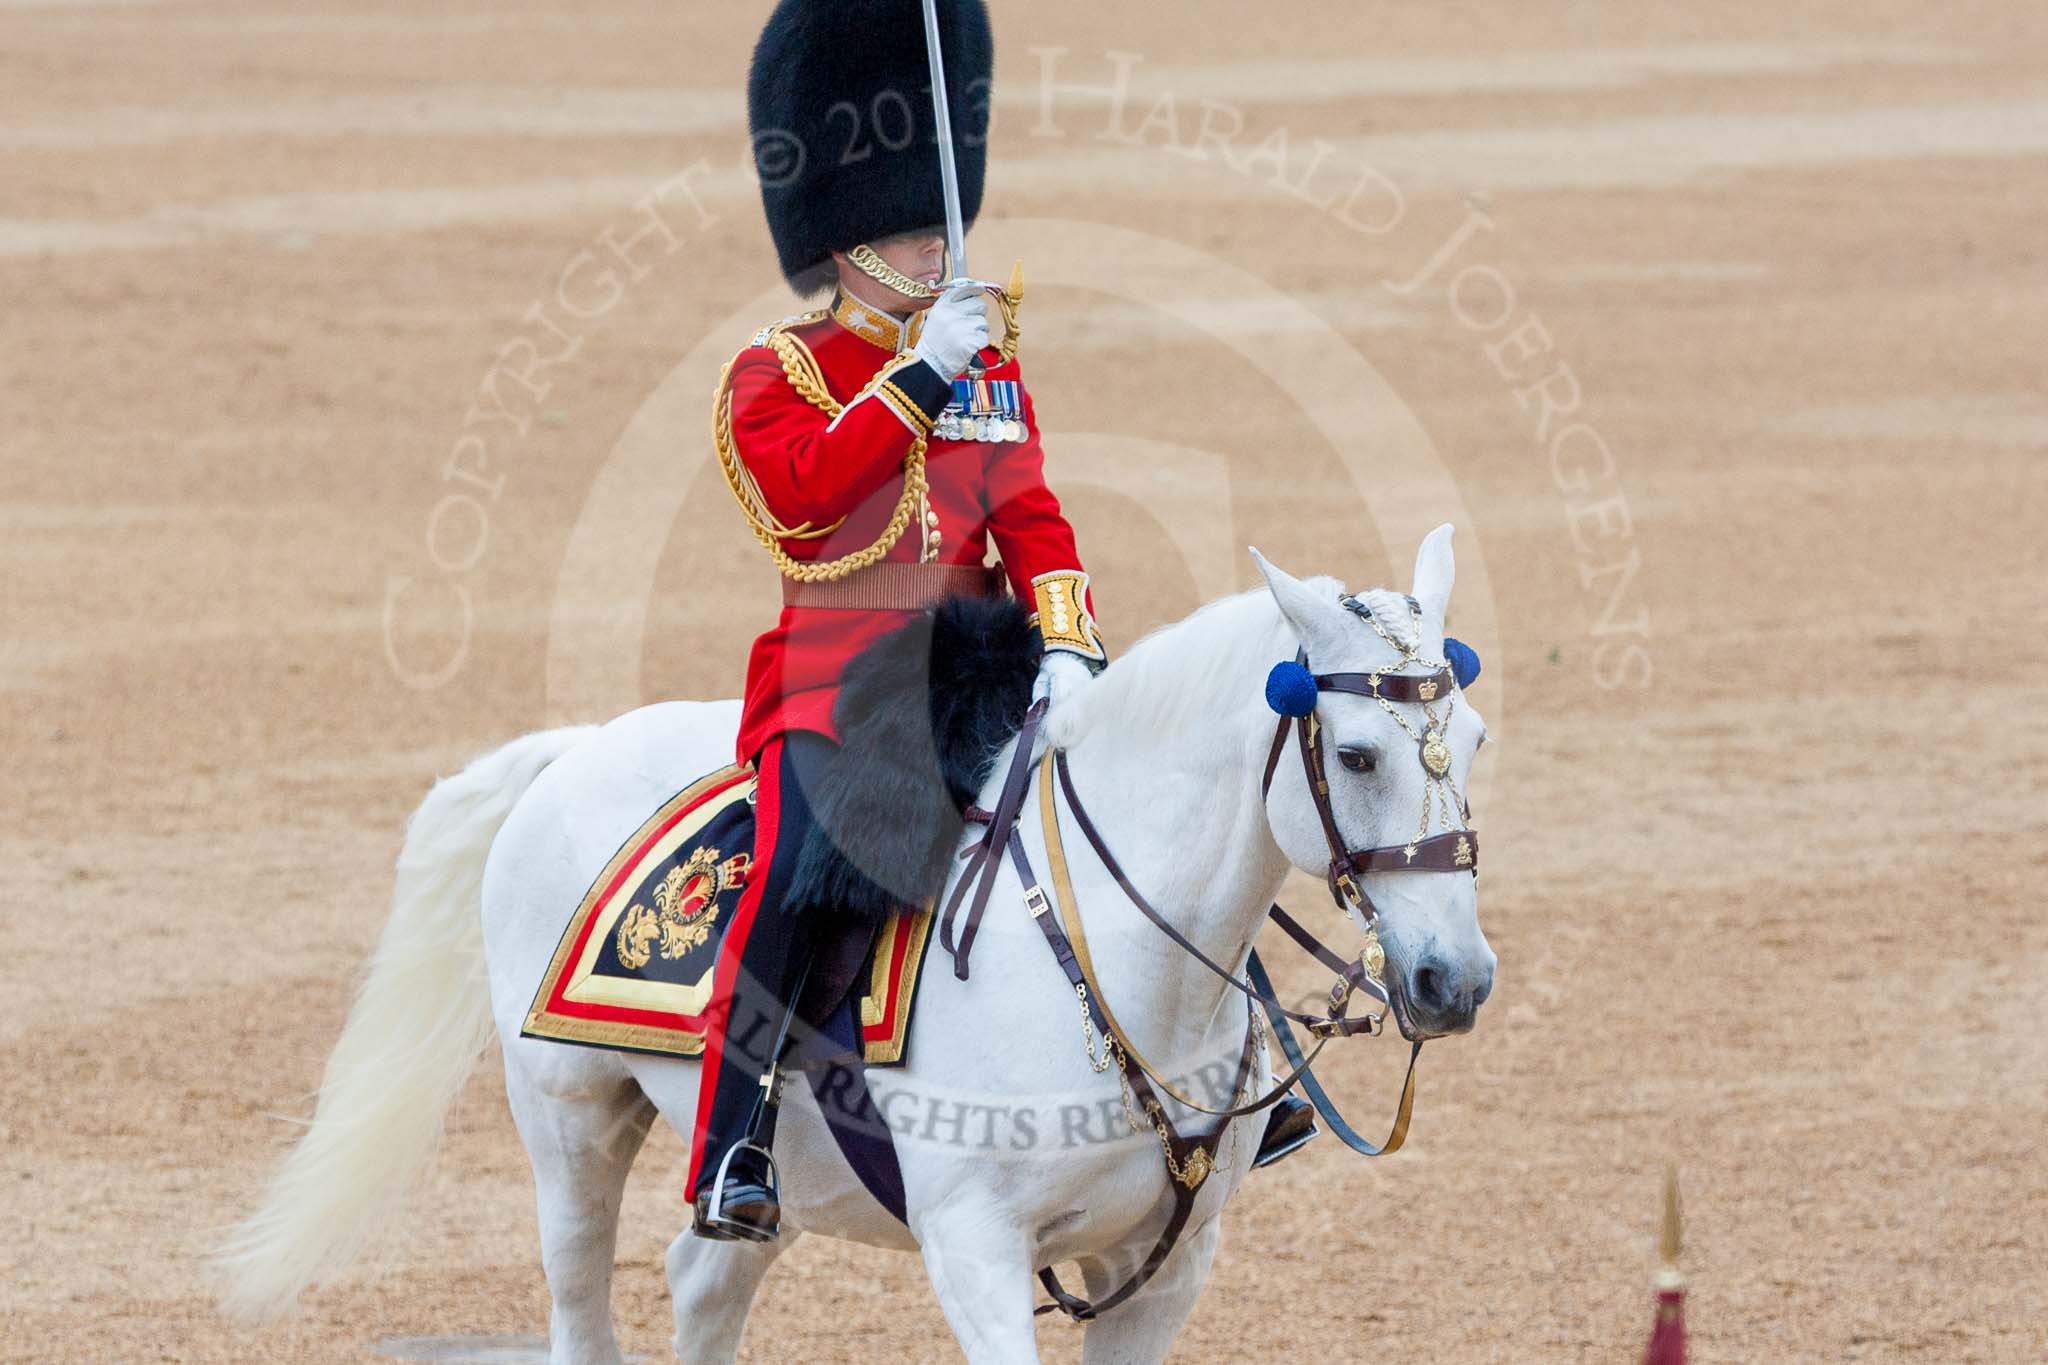 Trooping the Colour 2015. Image #477, 13 June 2015 11:38 Horse Guards Parade, London, UK